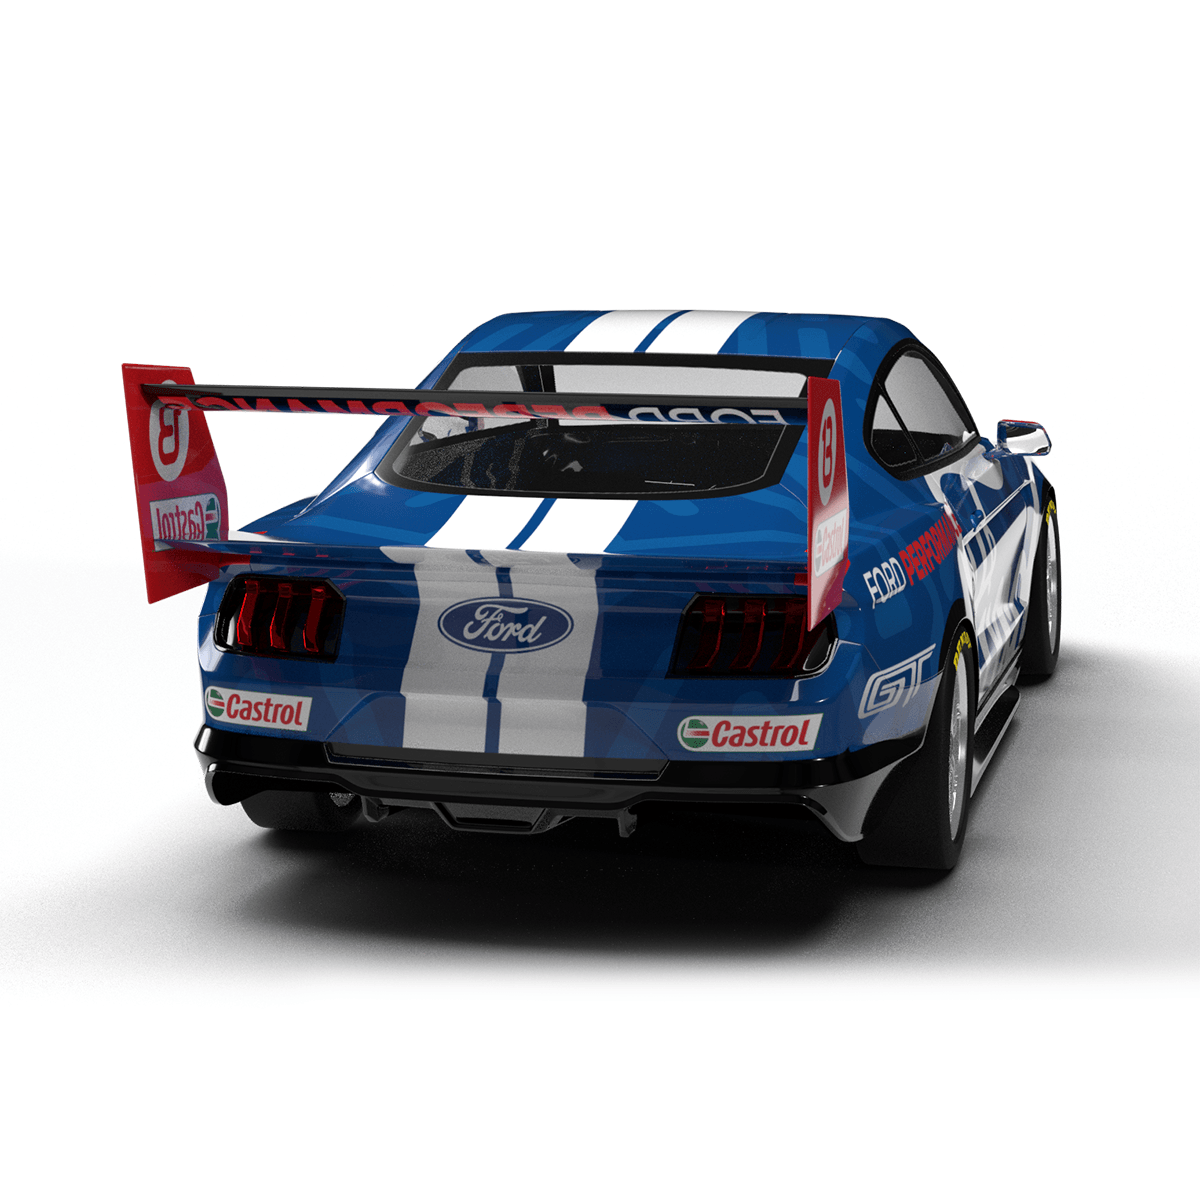 2019 Ford Mustang Gen 2 Supercar 3D Model Livery Template